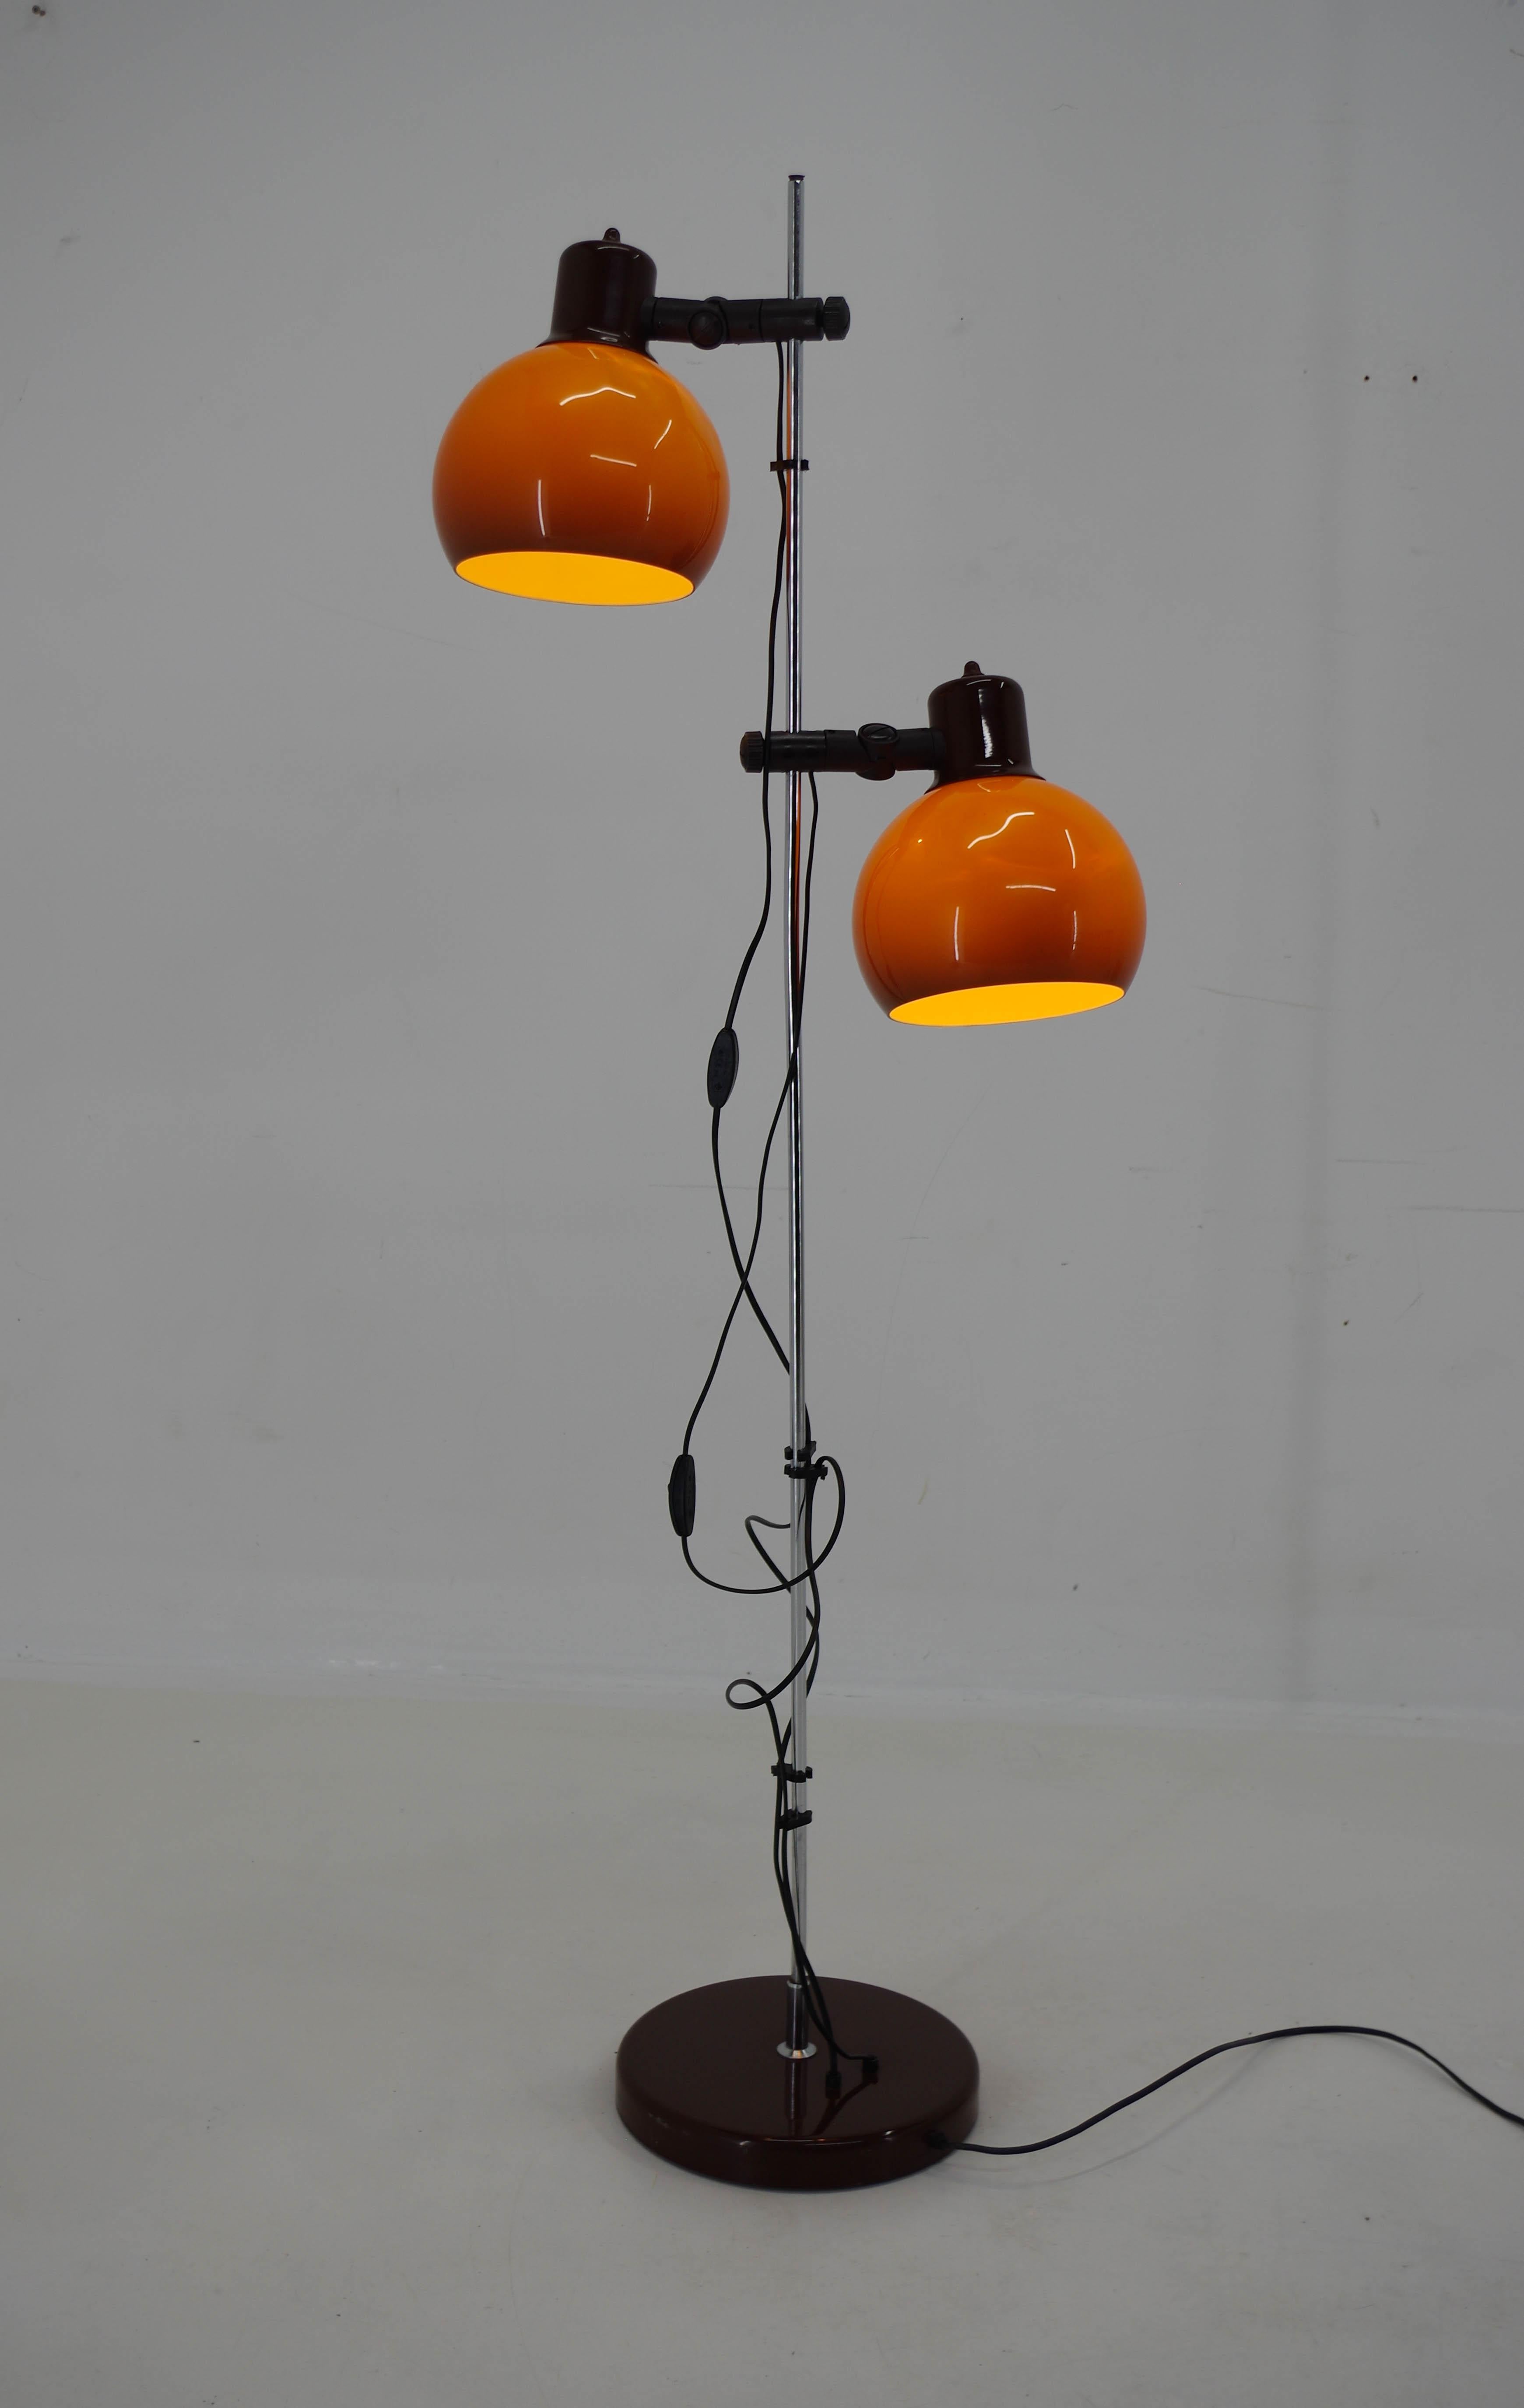 Floor lamp with adjustable orange plastic shades.
Made in Hungary in 1970s.
Very good original condition.
2x40W, E25-E27 bulbs
US plug adapter included.